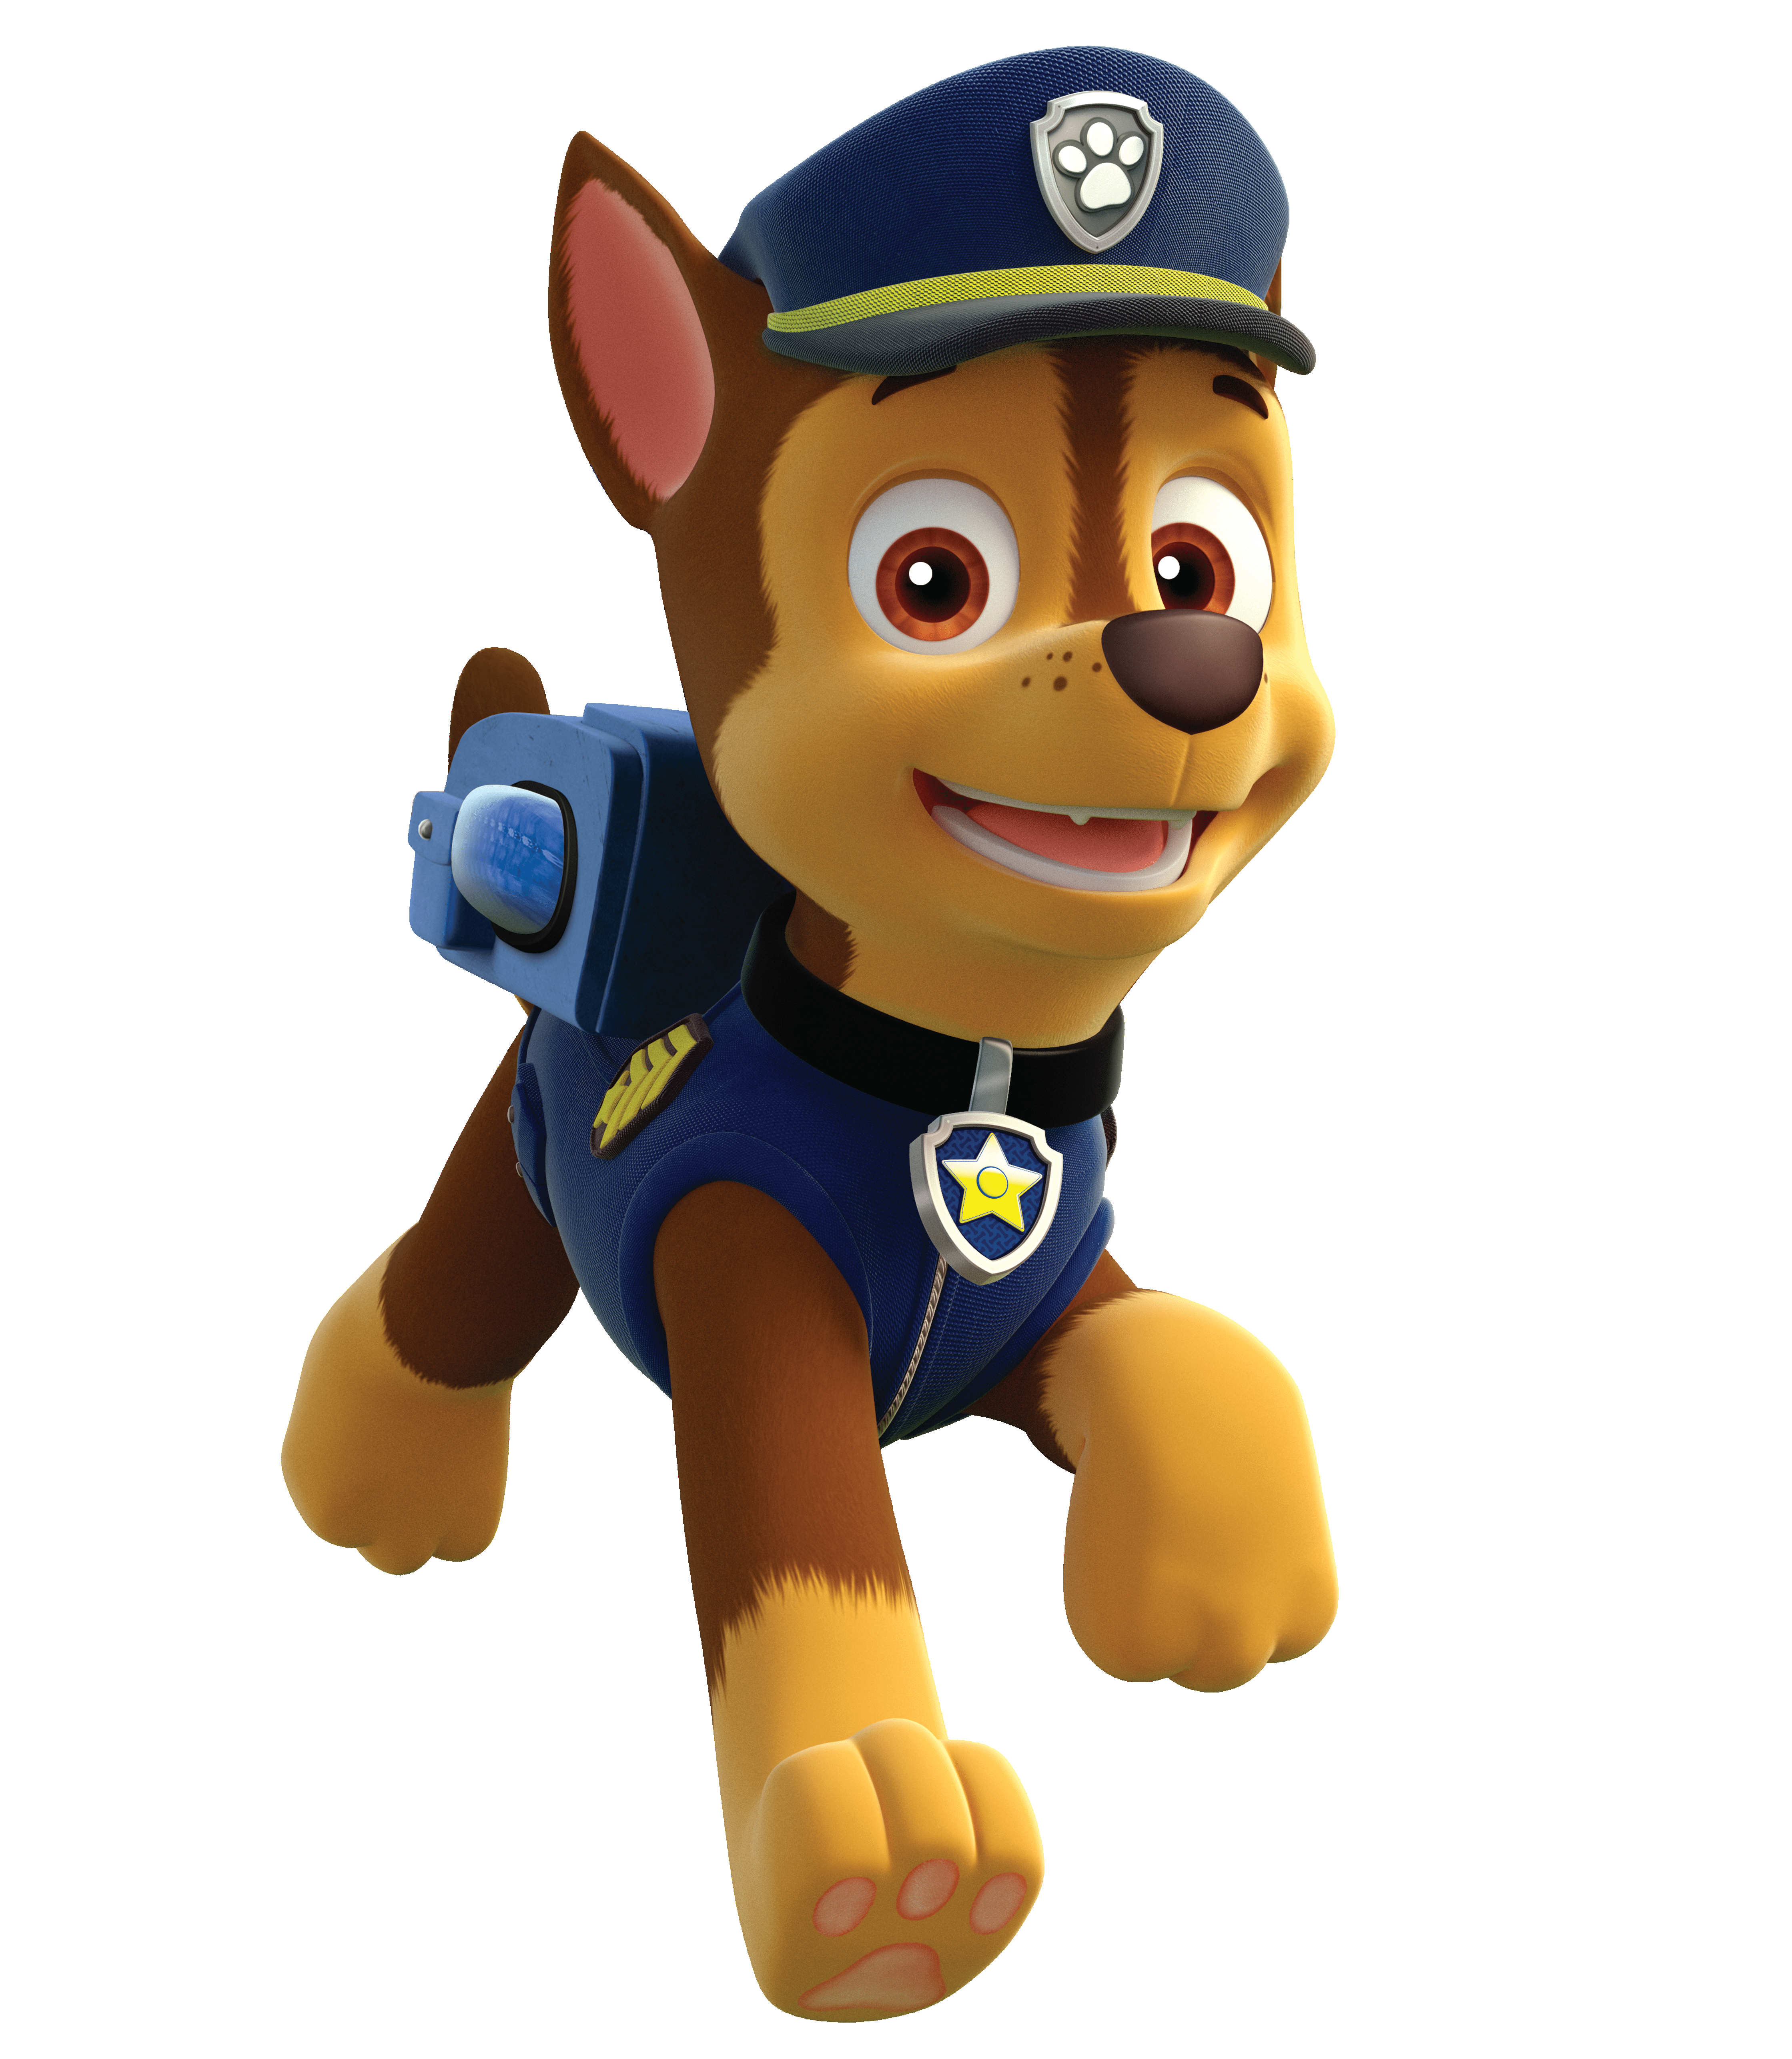 Cat Paw Patrol Chase Related Keywords & Suggestions - Cat Pa